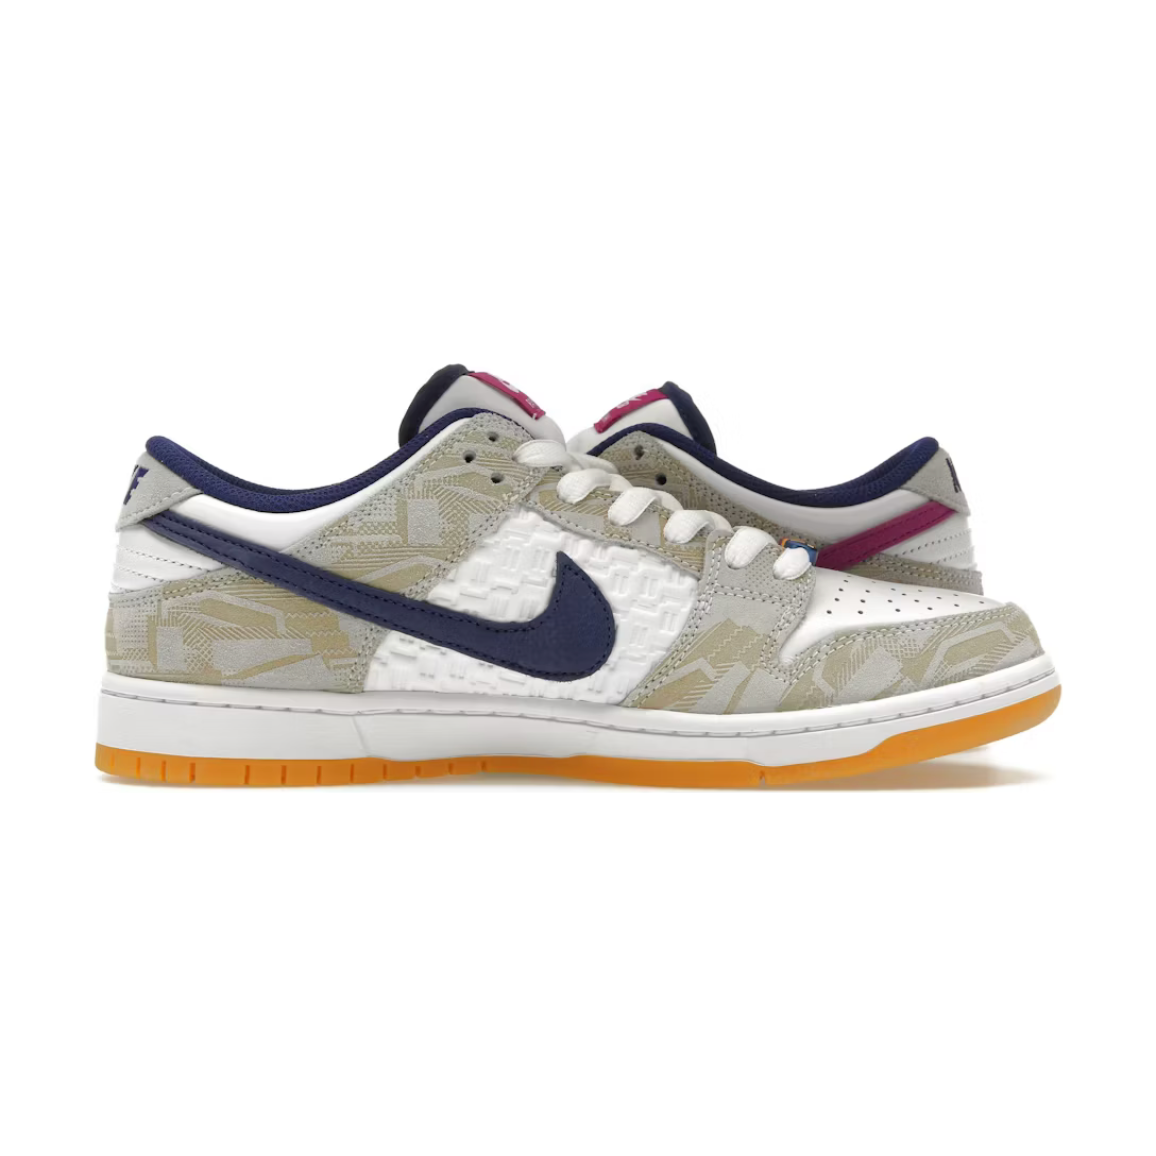 Nike SB Dunk Low Rayssa Leal by Nike from £195.00